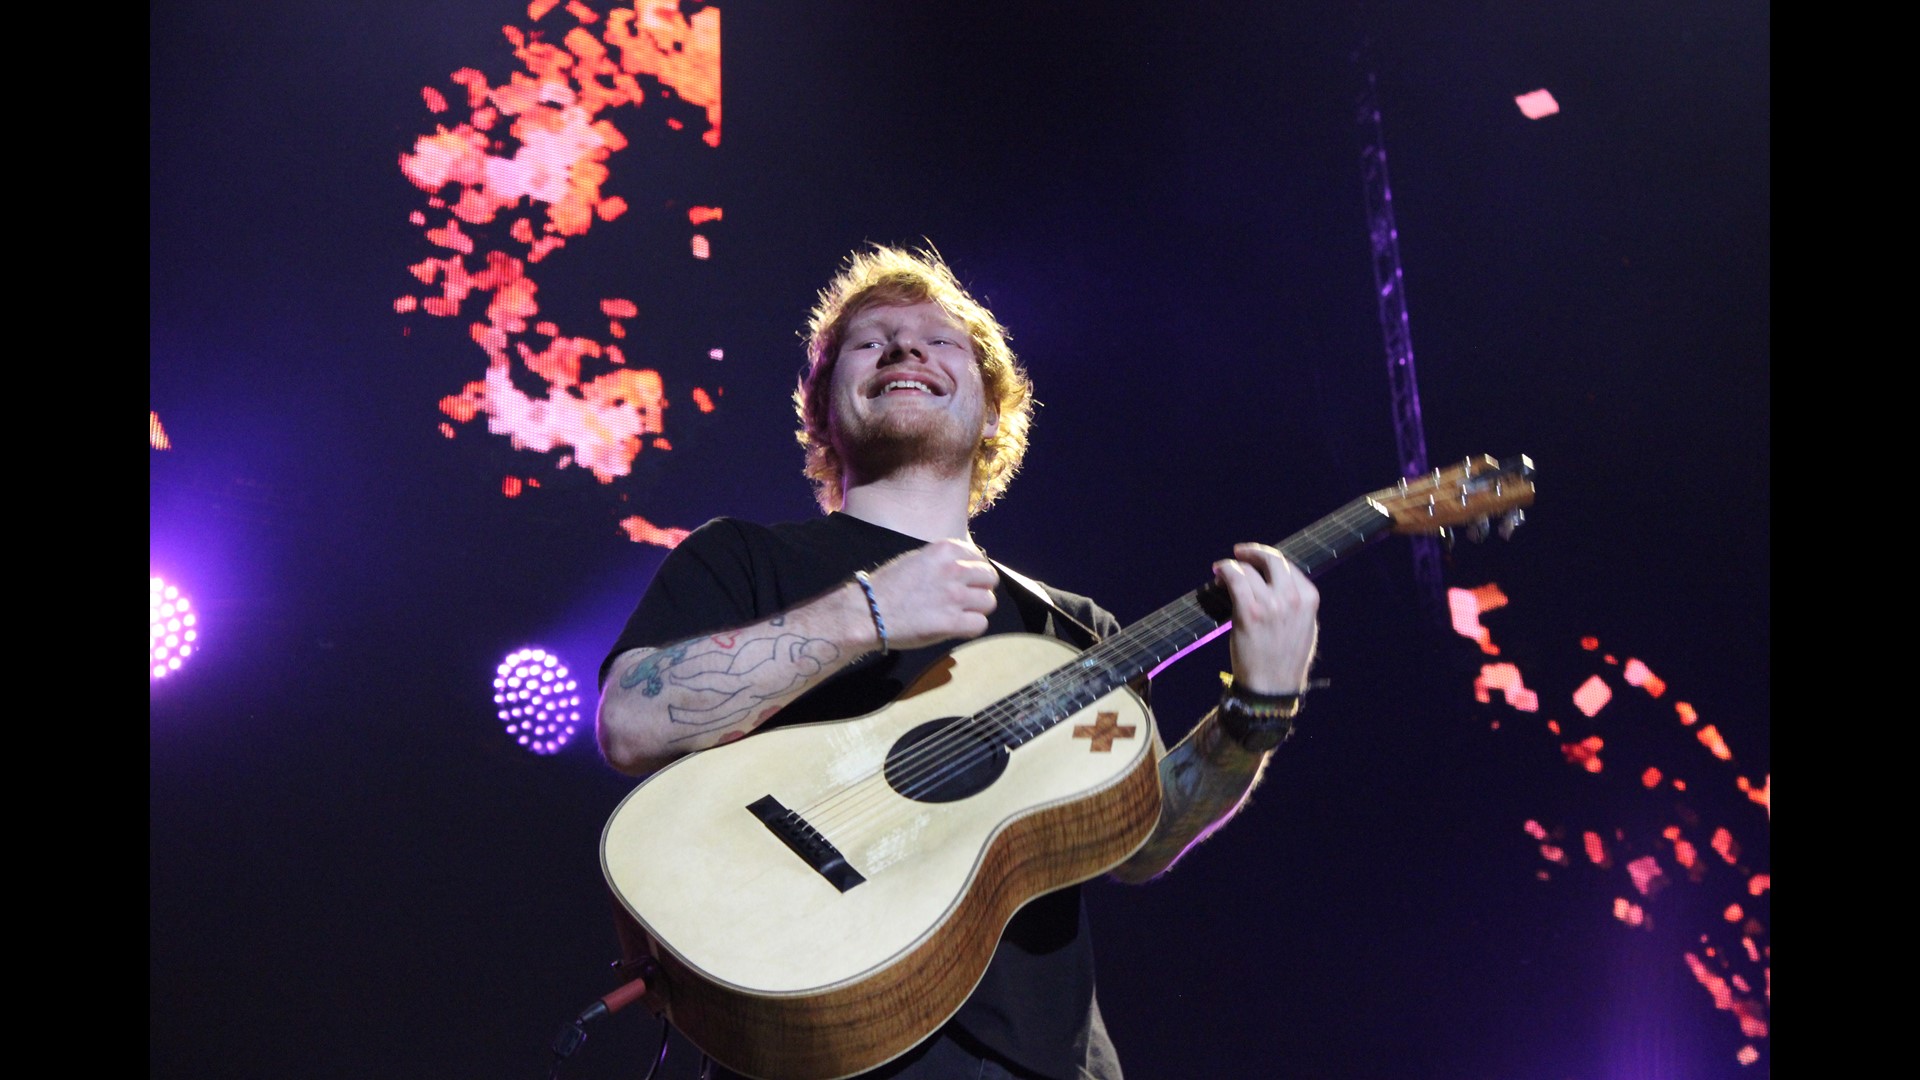 Ed Sheeran announces 2nd stop at Gillette Stadium on 2023 tour